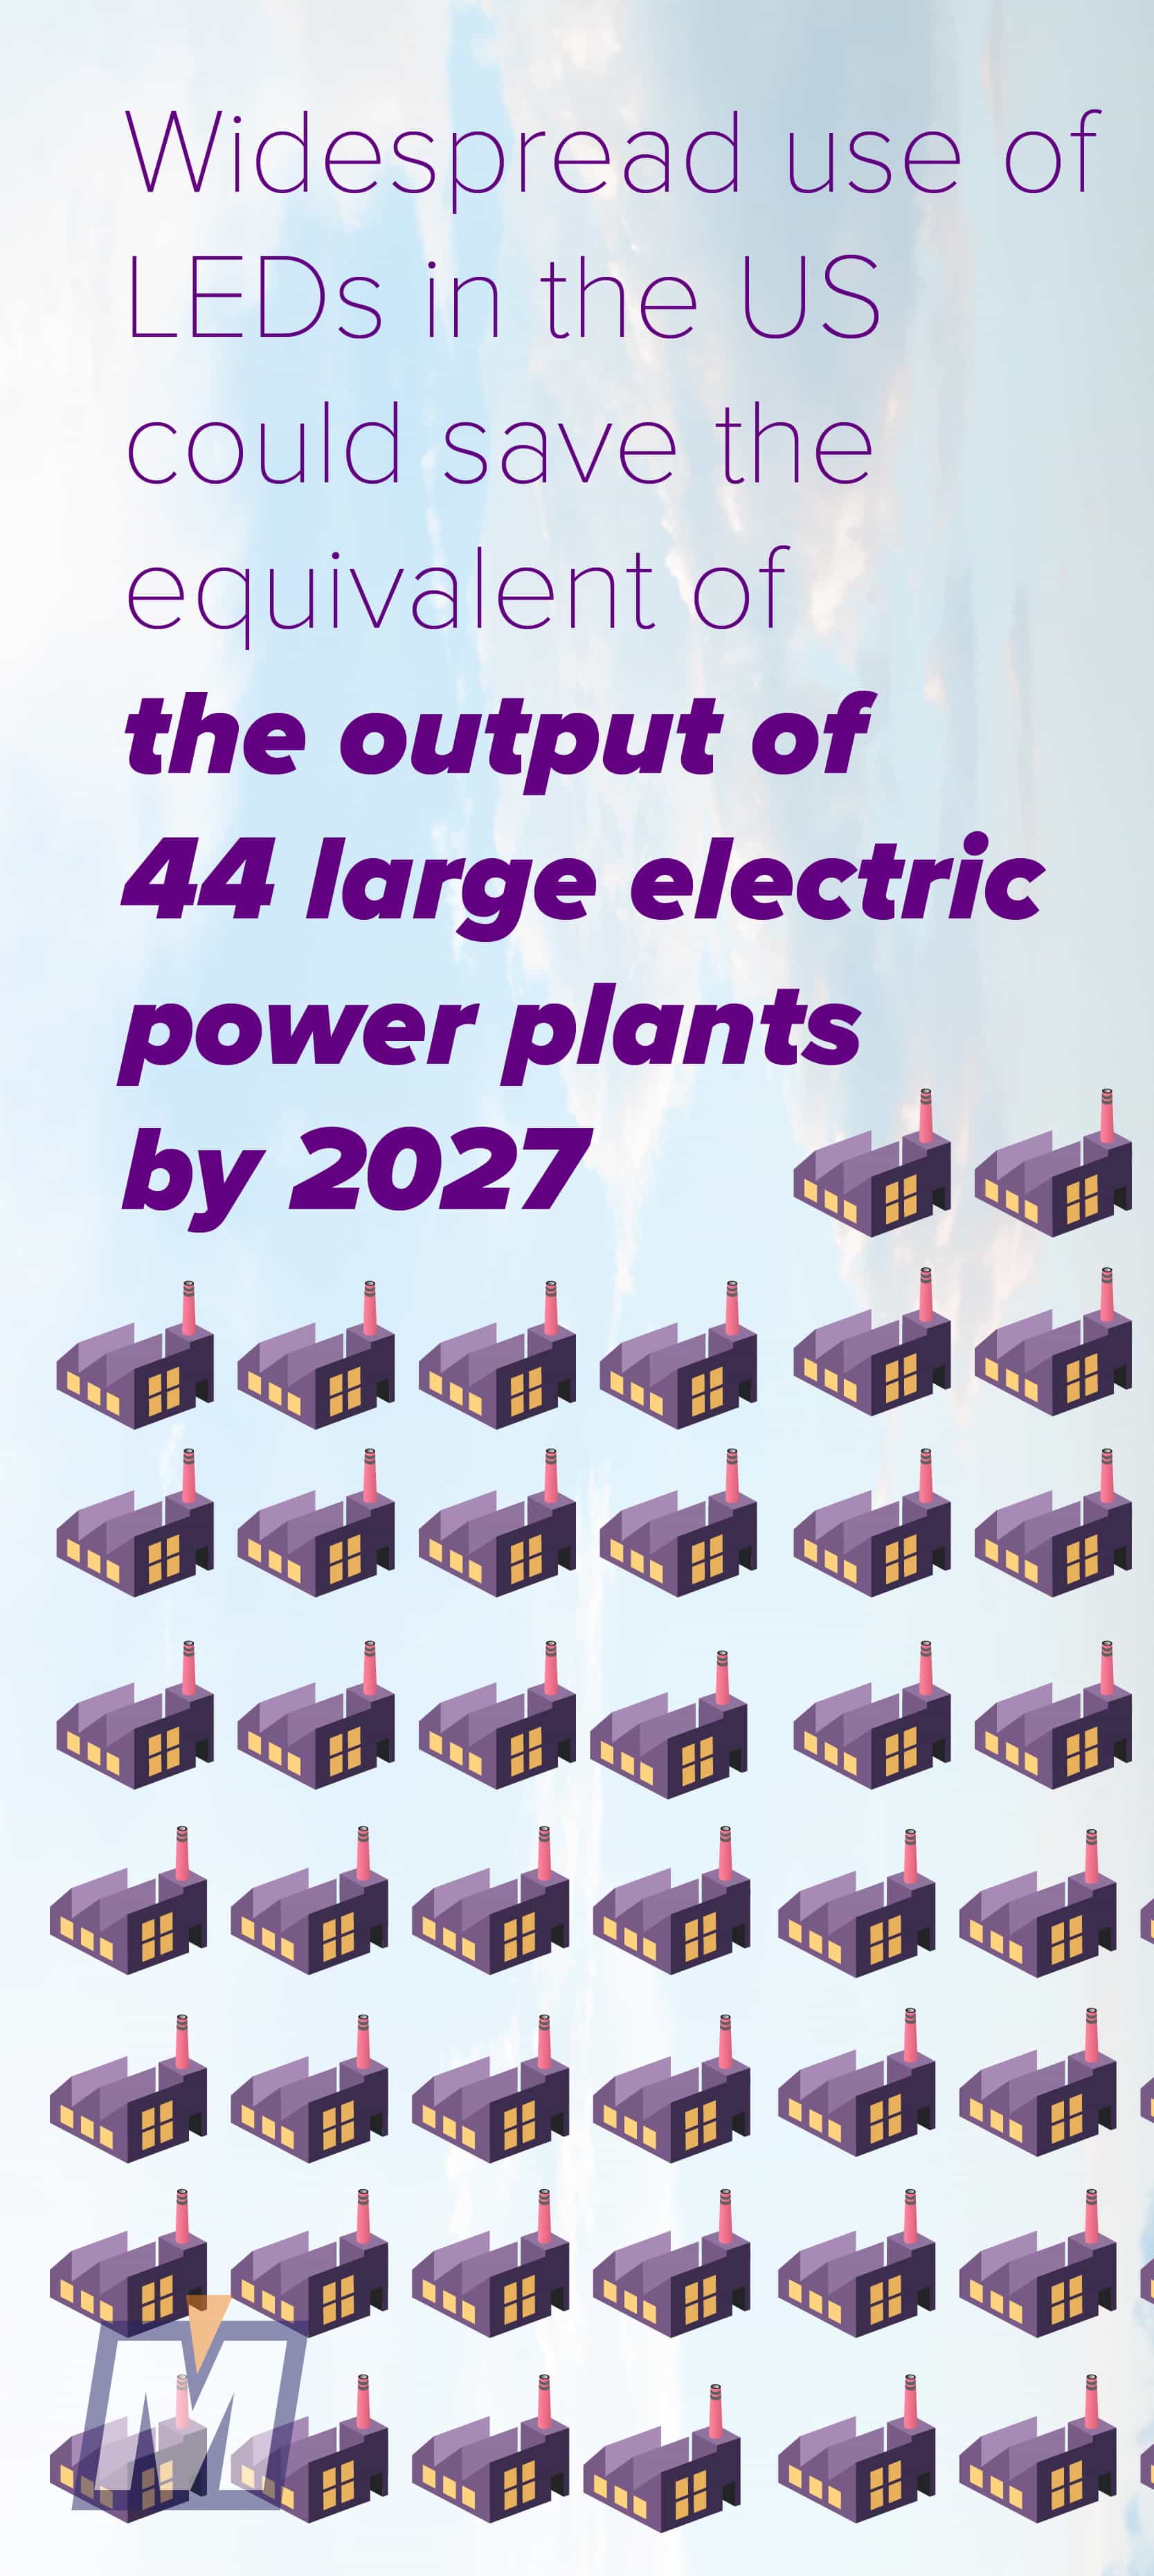 Widespread use of LEDs could save the energy equivalent of 44 large electric power plants by 2027